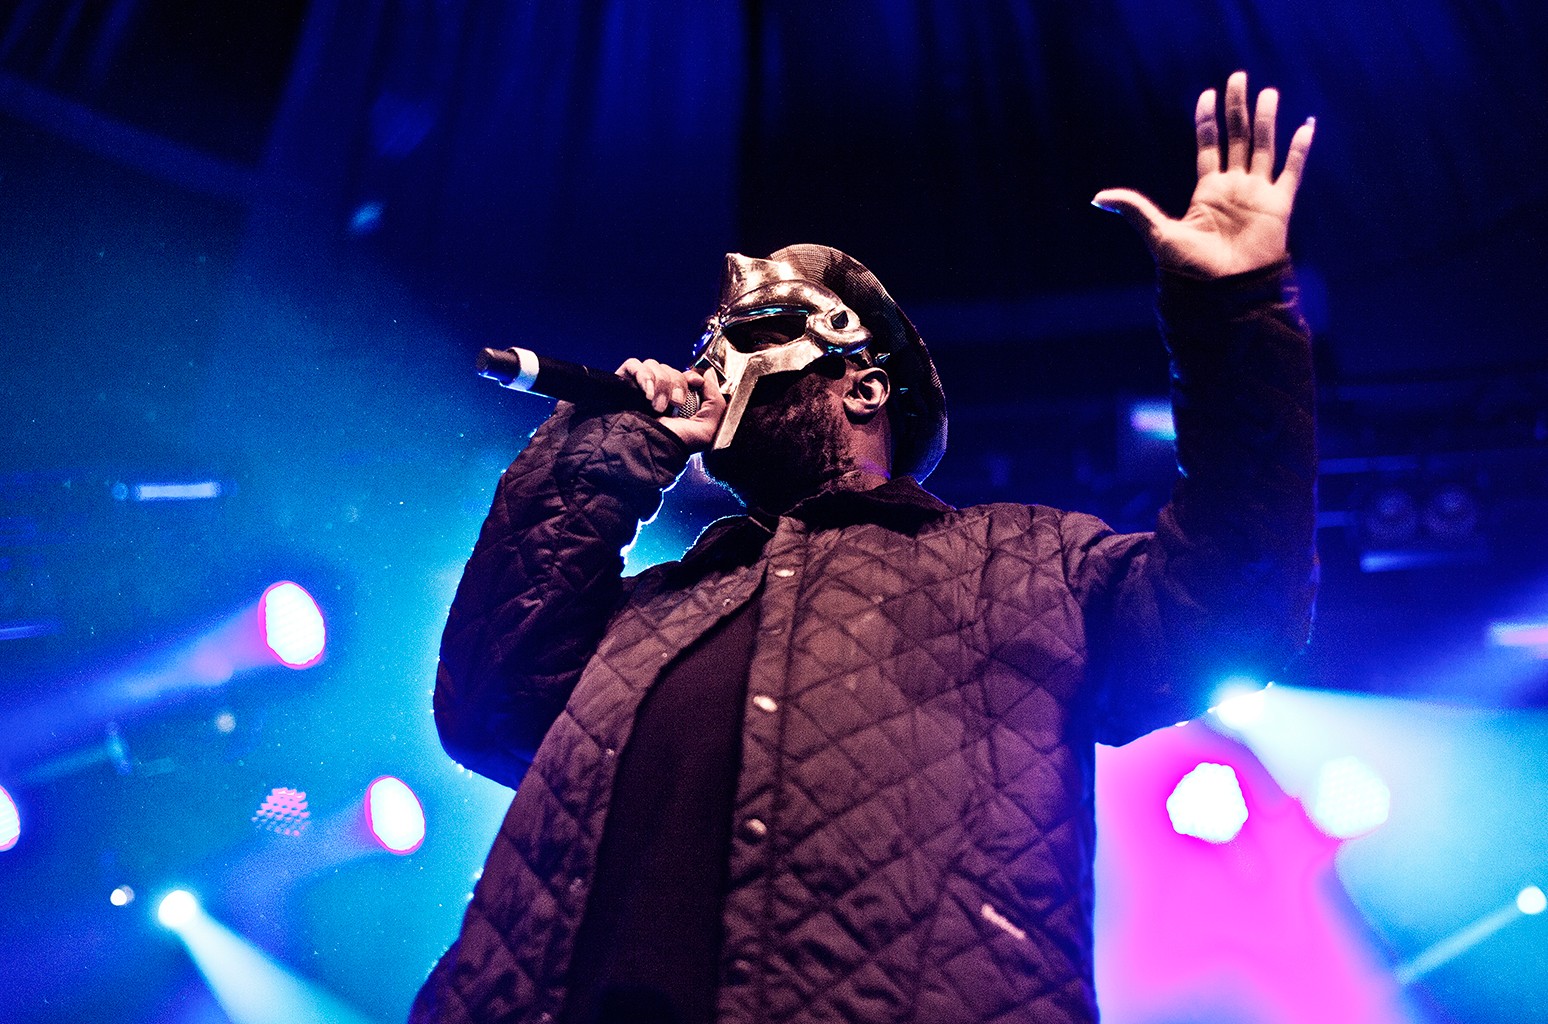 MF DOOM performing at the Vanguard Music Festival. (Photo by Getty Images)